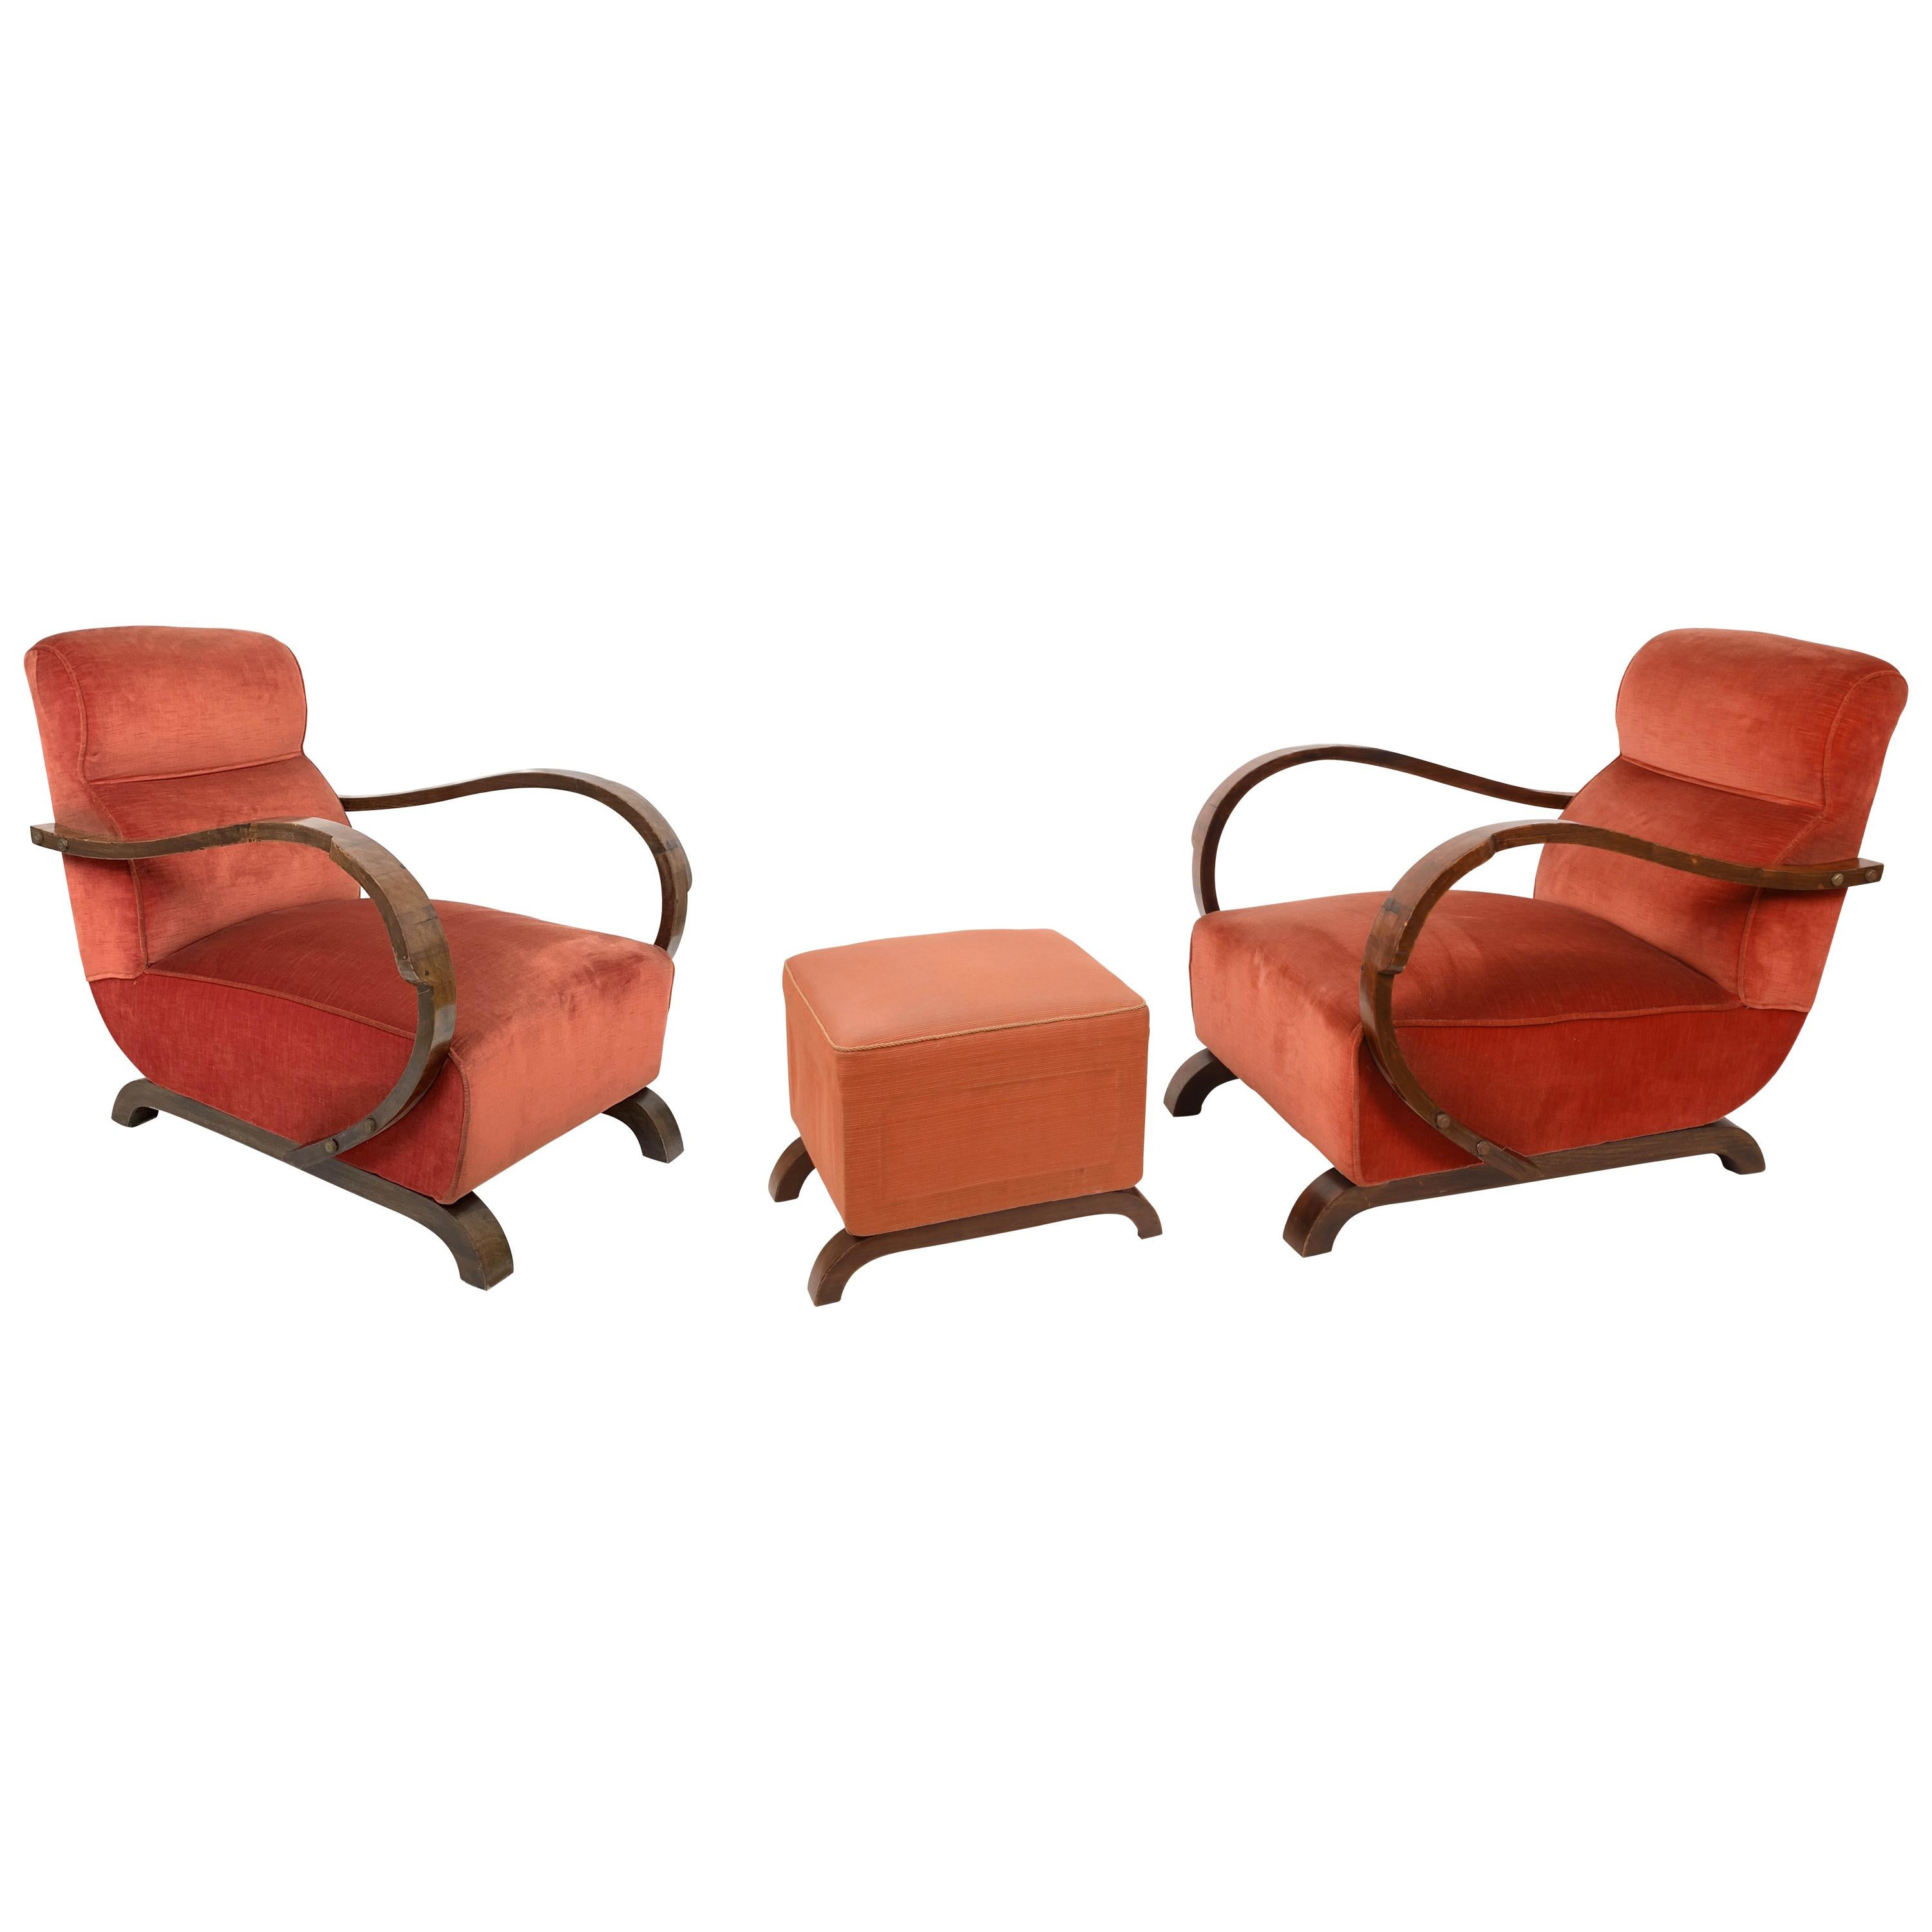 Art Deco Armchairs in Walnut and Fabric and an Ottoman, Italy, circa 1930